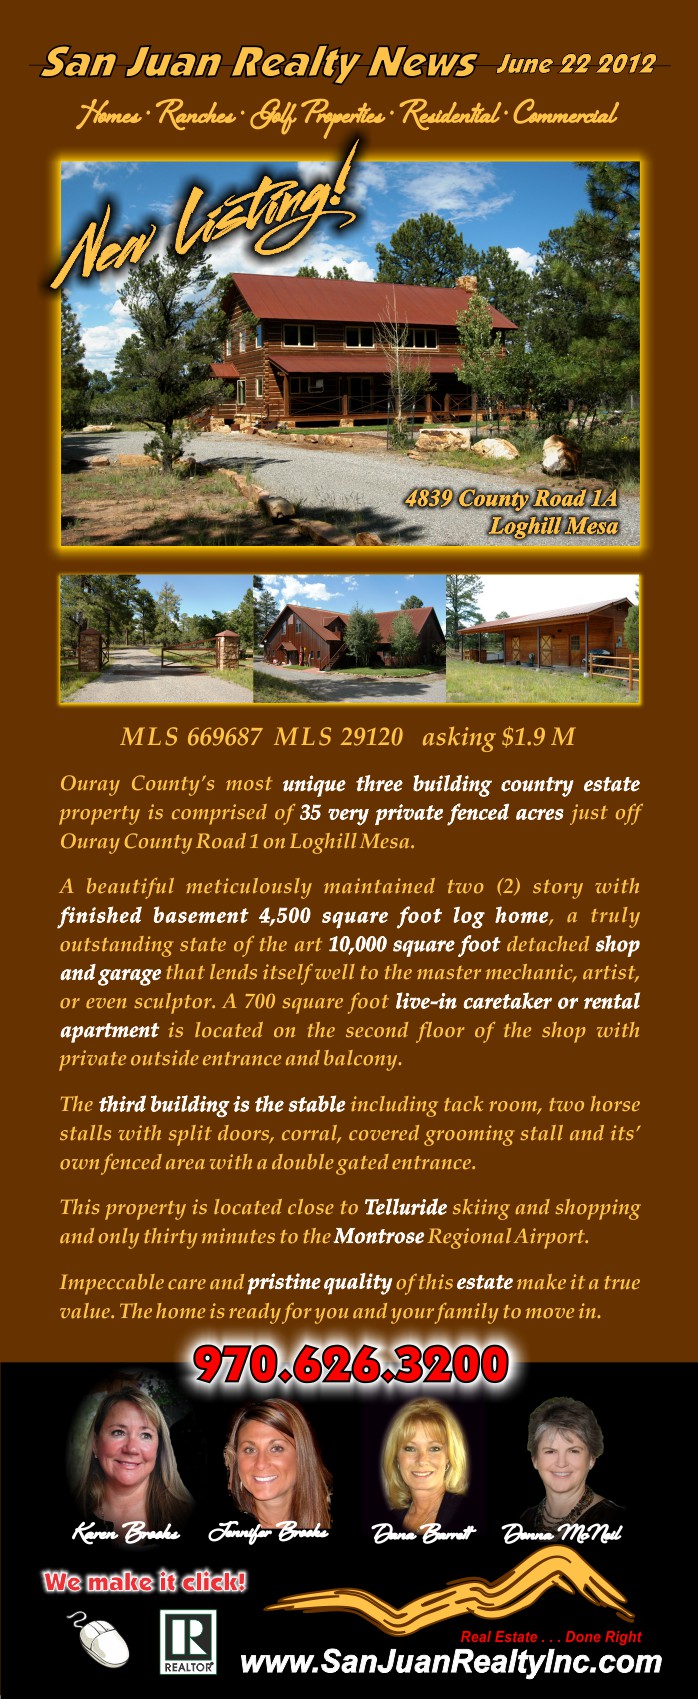 4839 County Road 1A Loghill Mesa Ridgway Colorado for sale